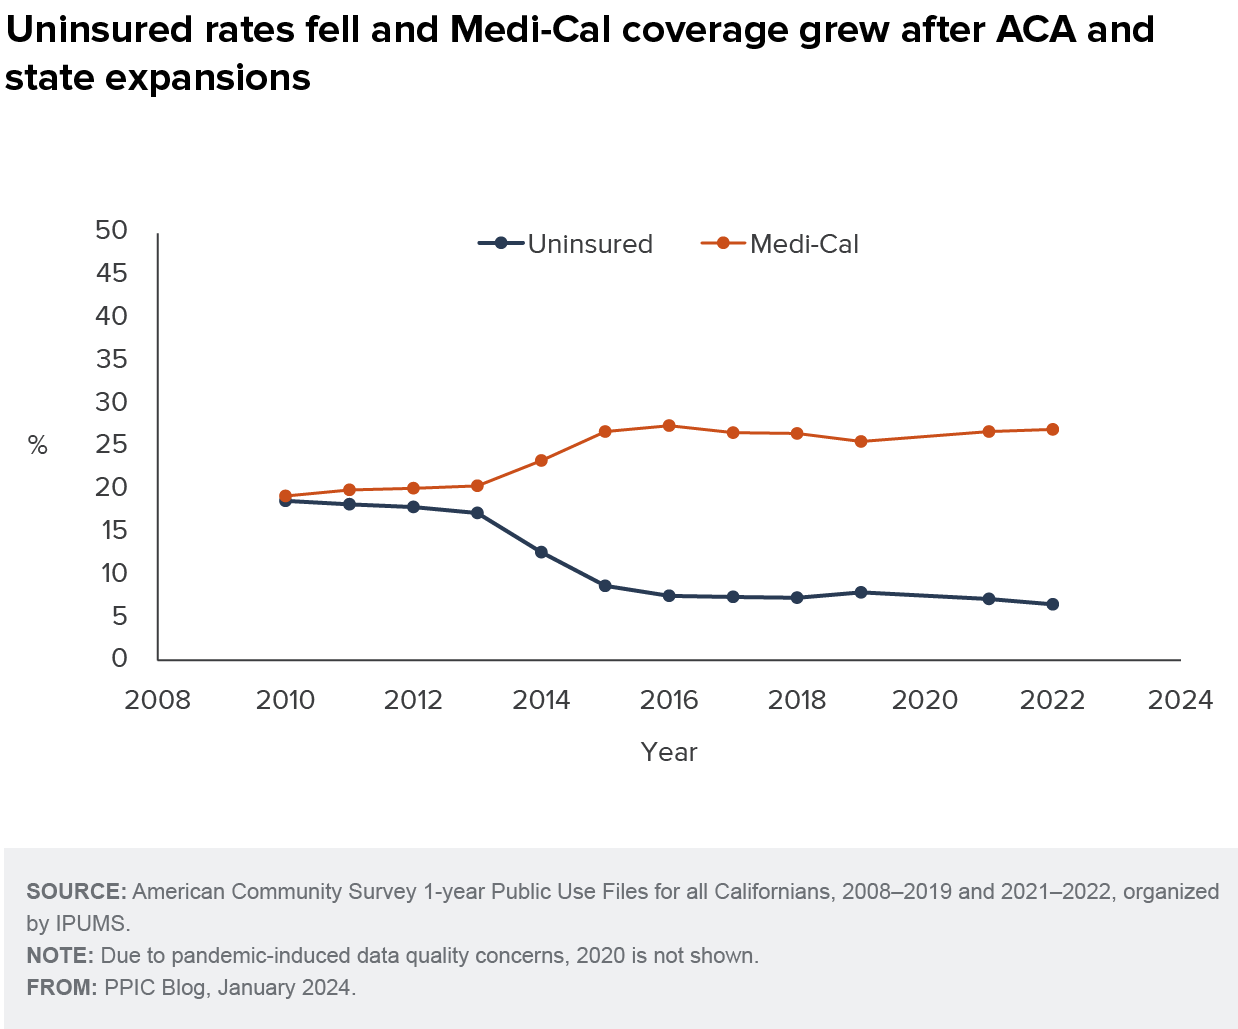 figure - Uninsured rates fell and Medi-Cal coverage grew after ACA and state expansions